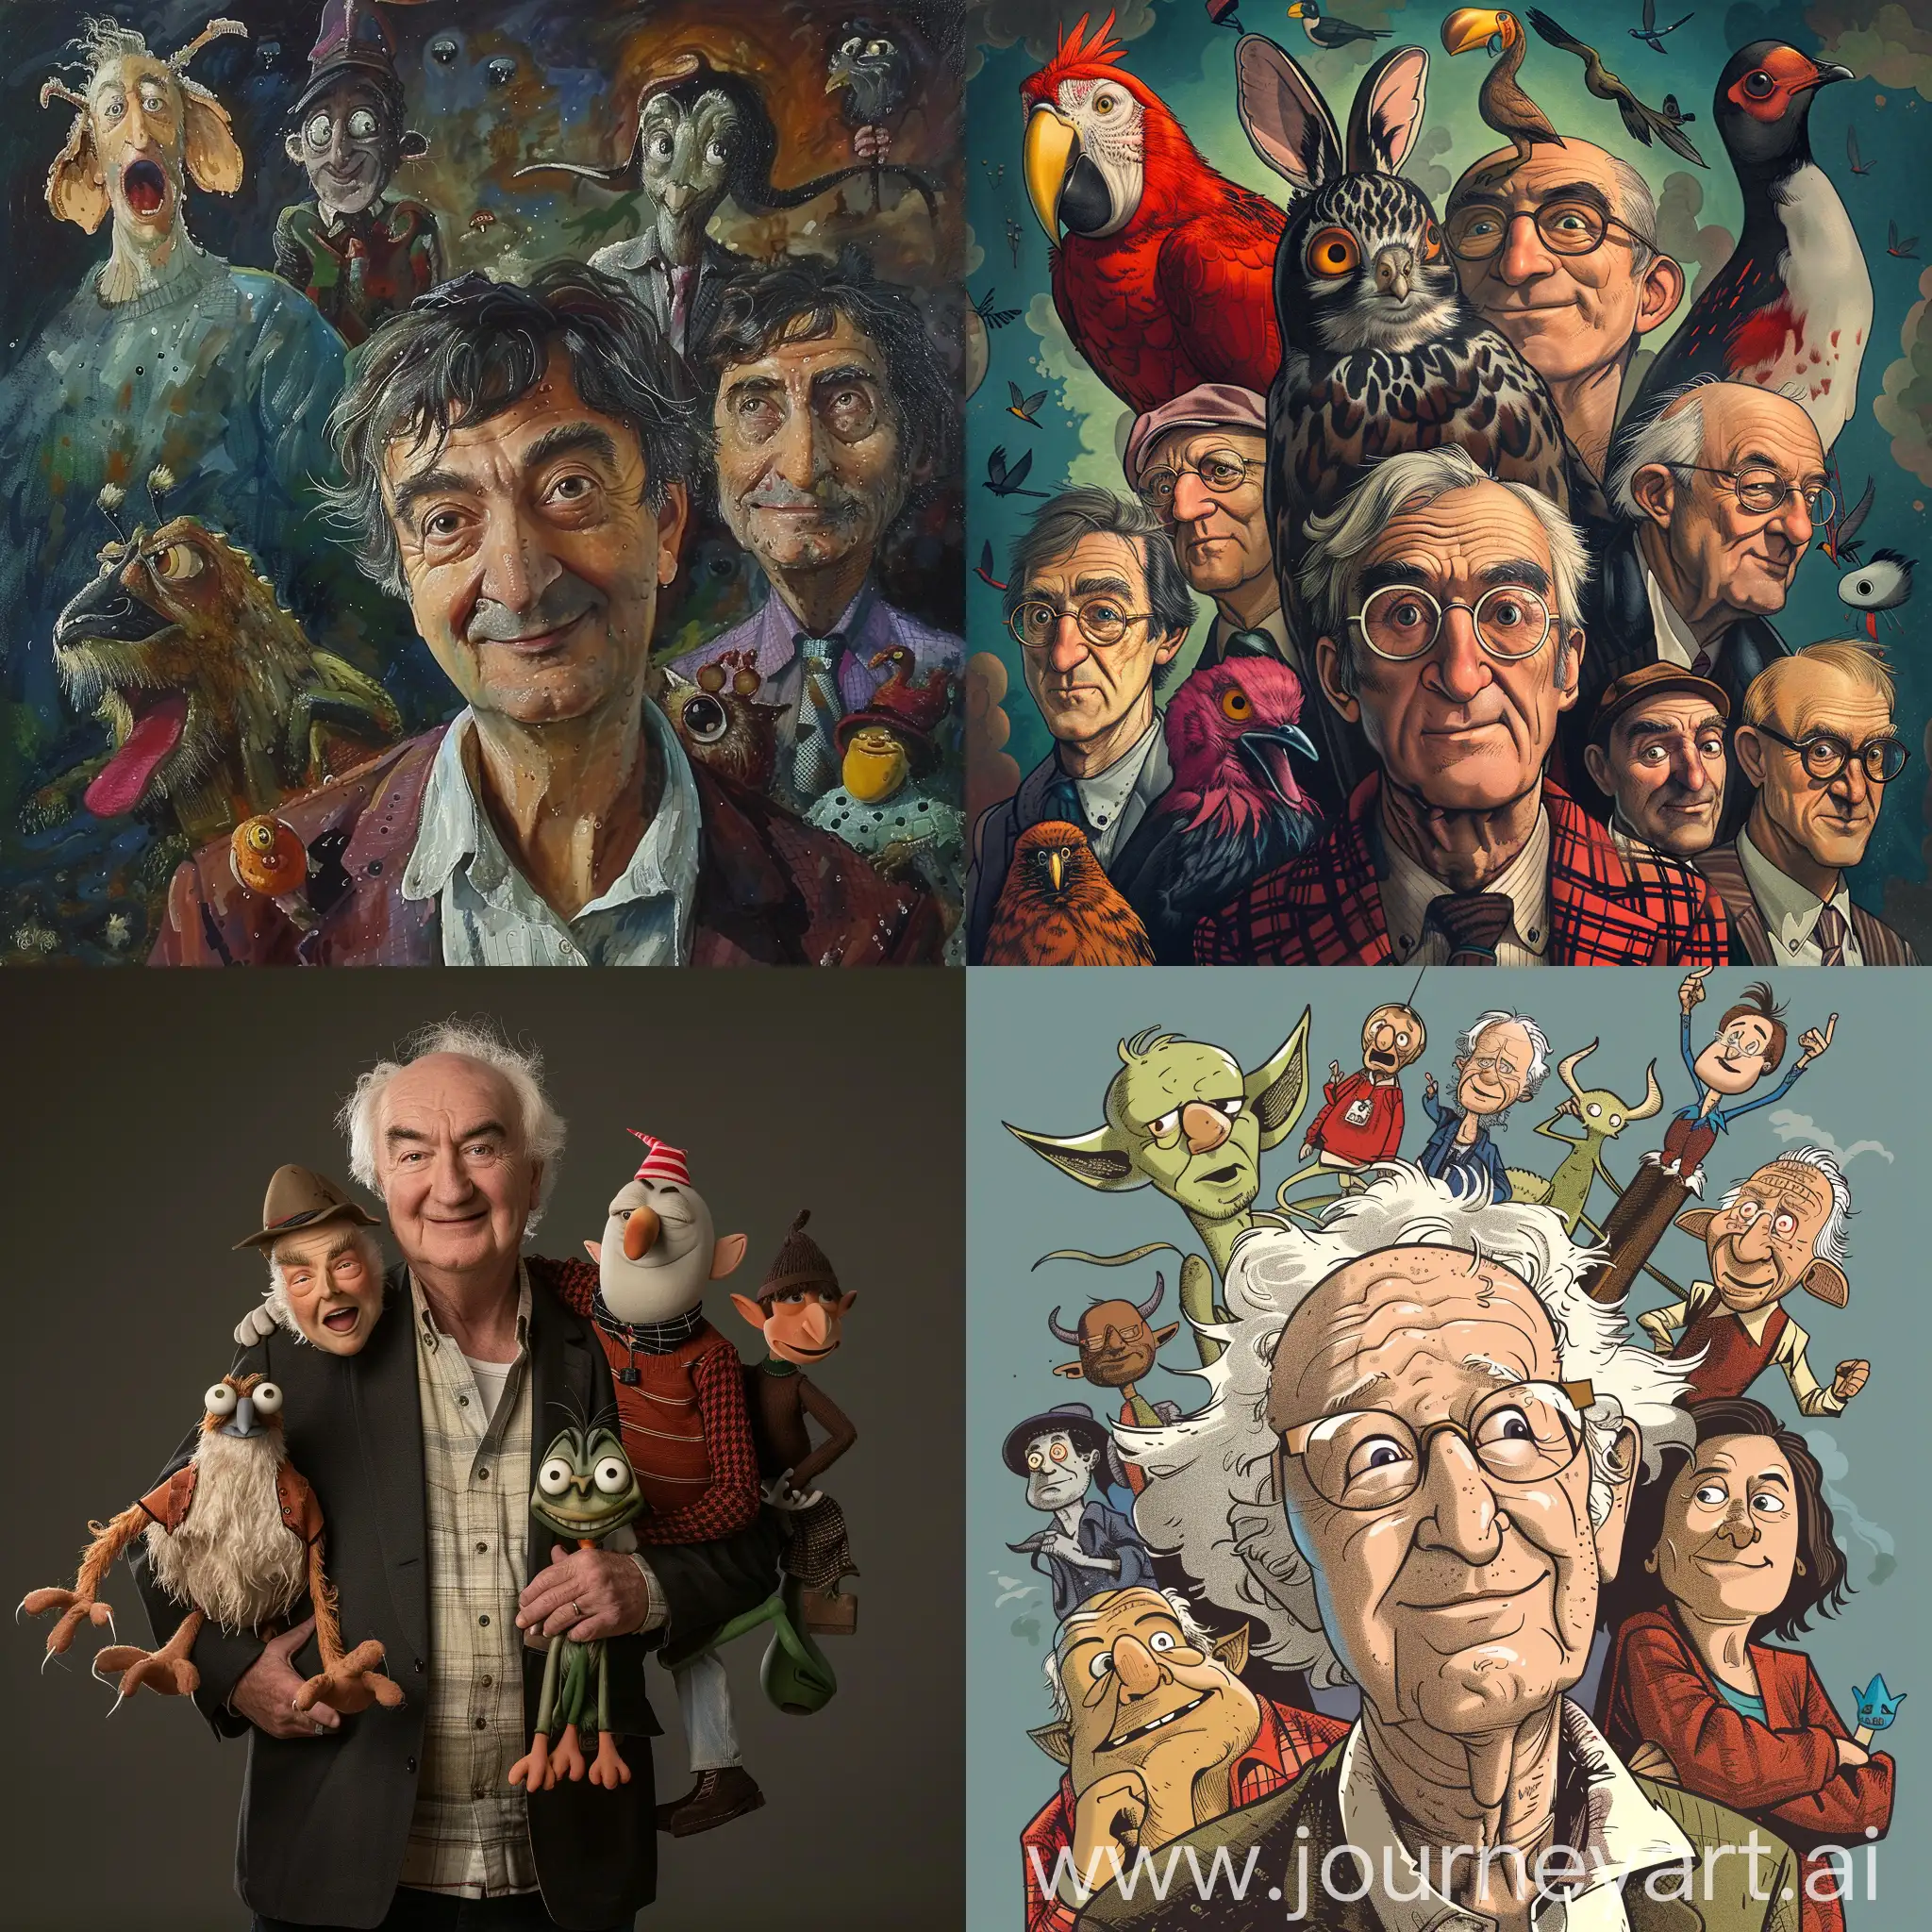 Author Douglas Adams and some of the characters from his books 